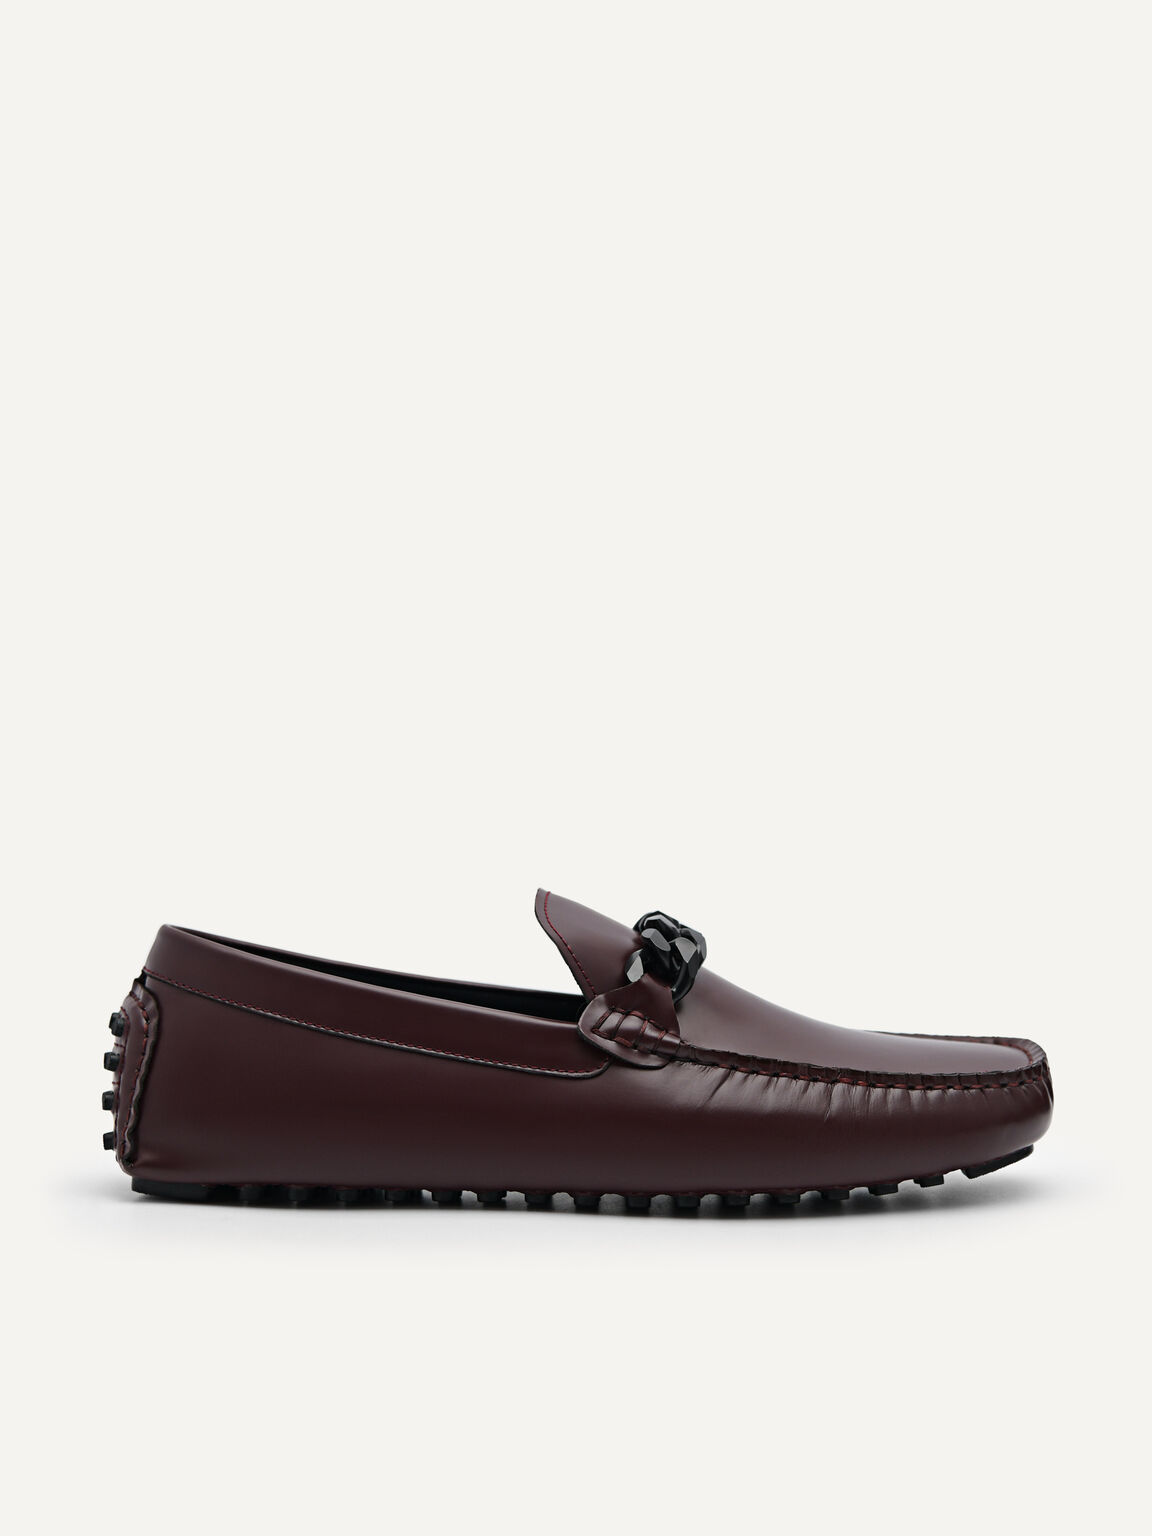 Leather Driving Moccassins with Curb Chain Saddle, Maroon